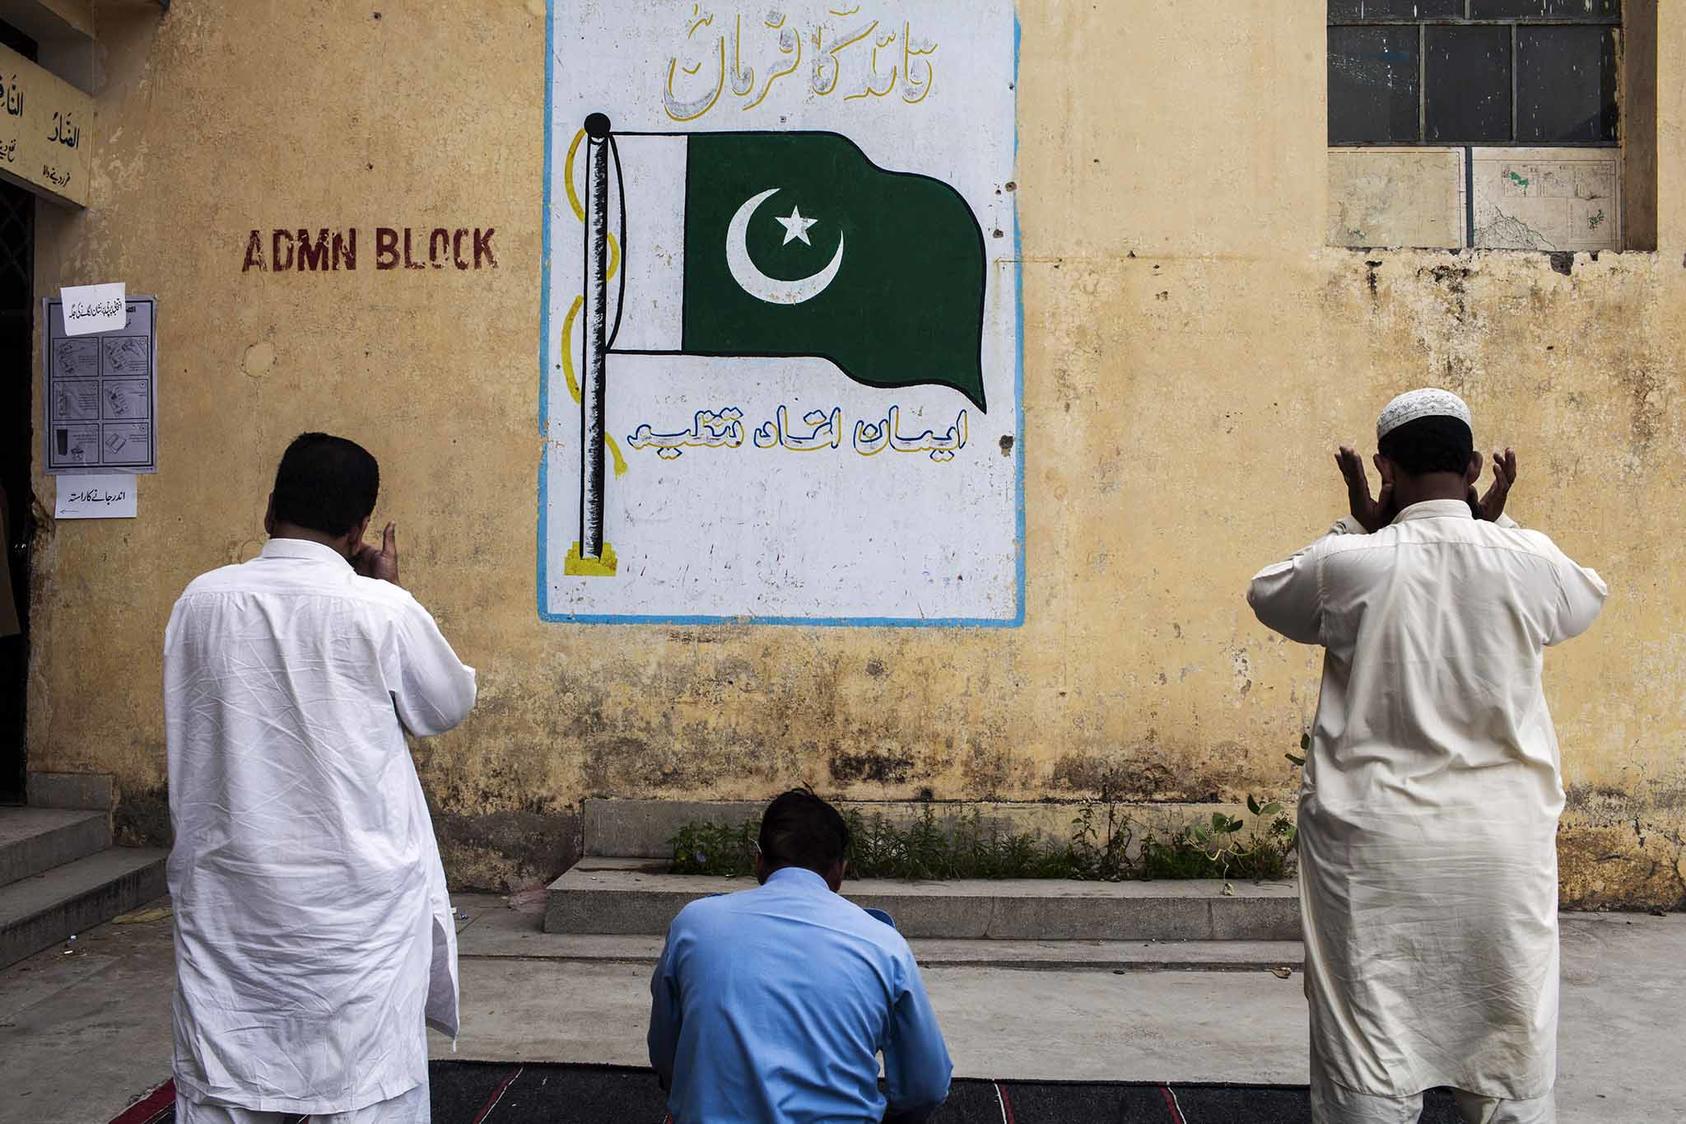 Men pray outside a polling station on Election Day in Islamabad, Pakistan in May 2013. (Diego Ibarra Sanchez/The New York Times)